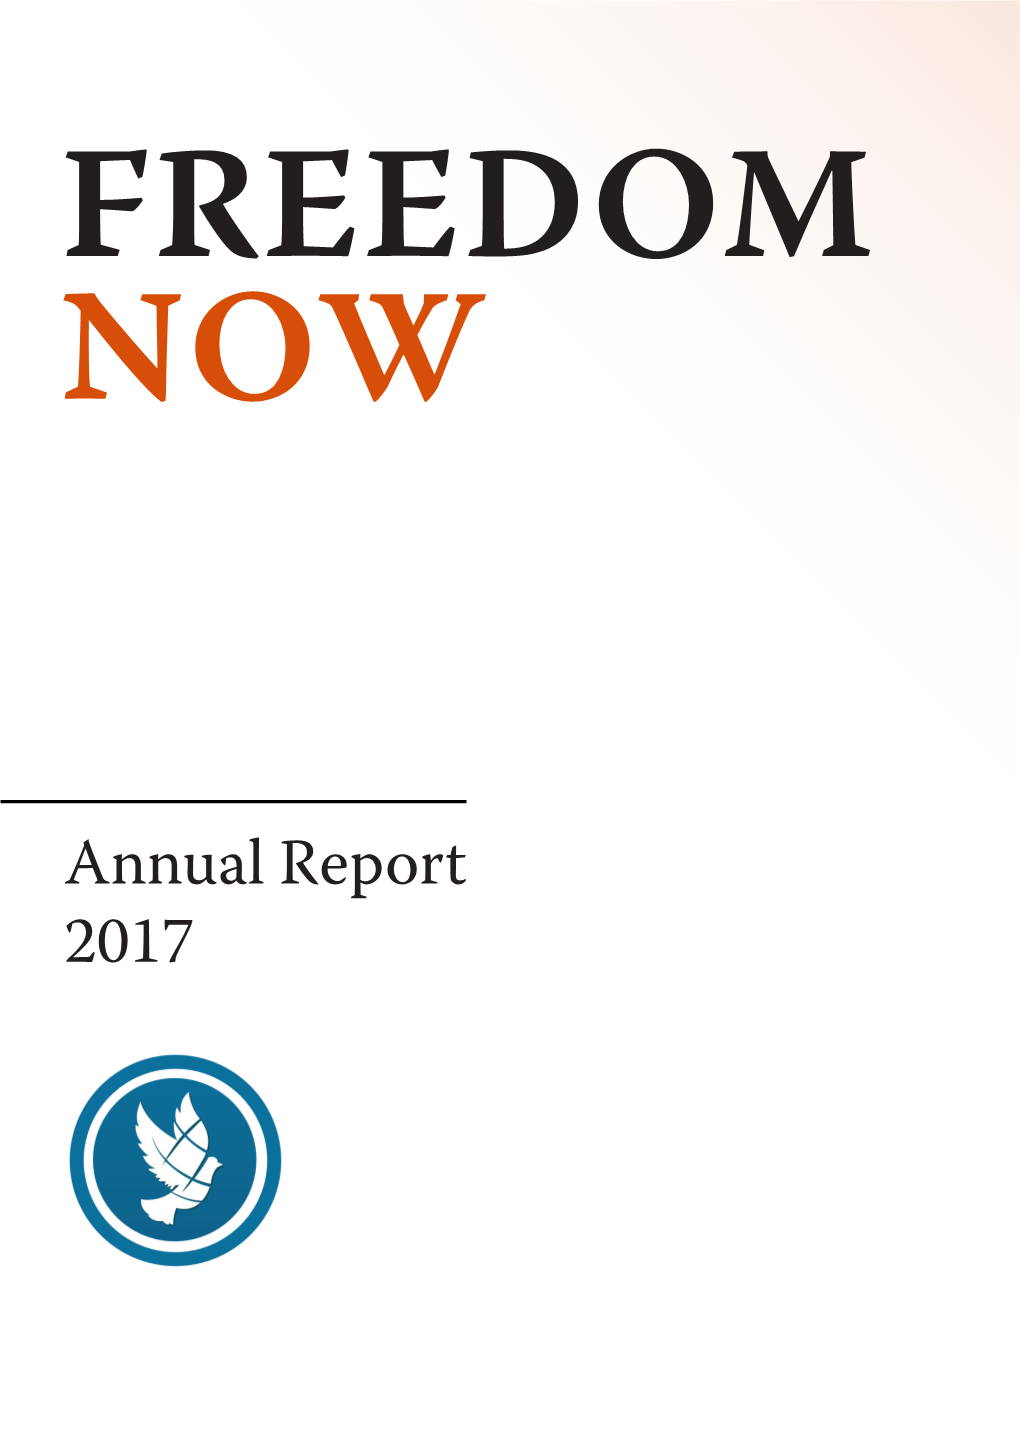 Annual Report 2017 INTRODUCTION Freedom Now Helps Free Prisoners of Conscience Around the World